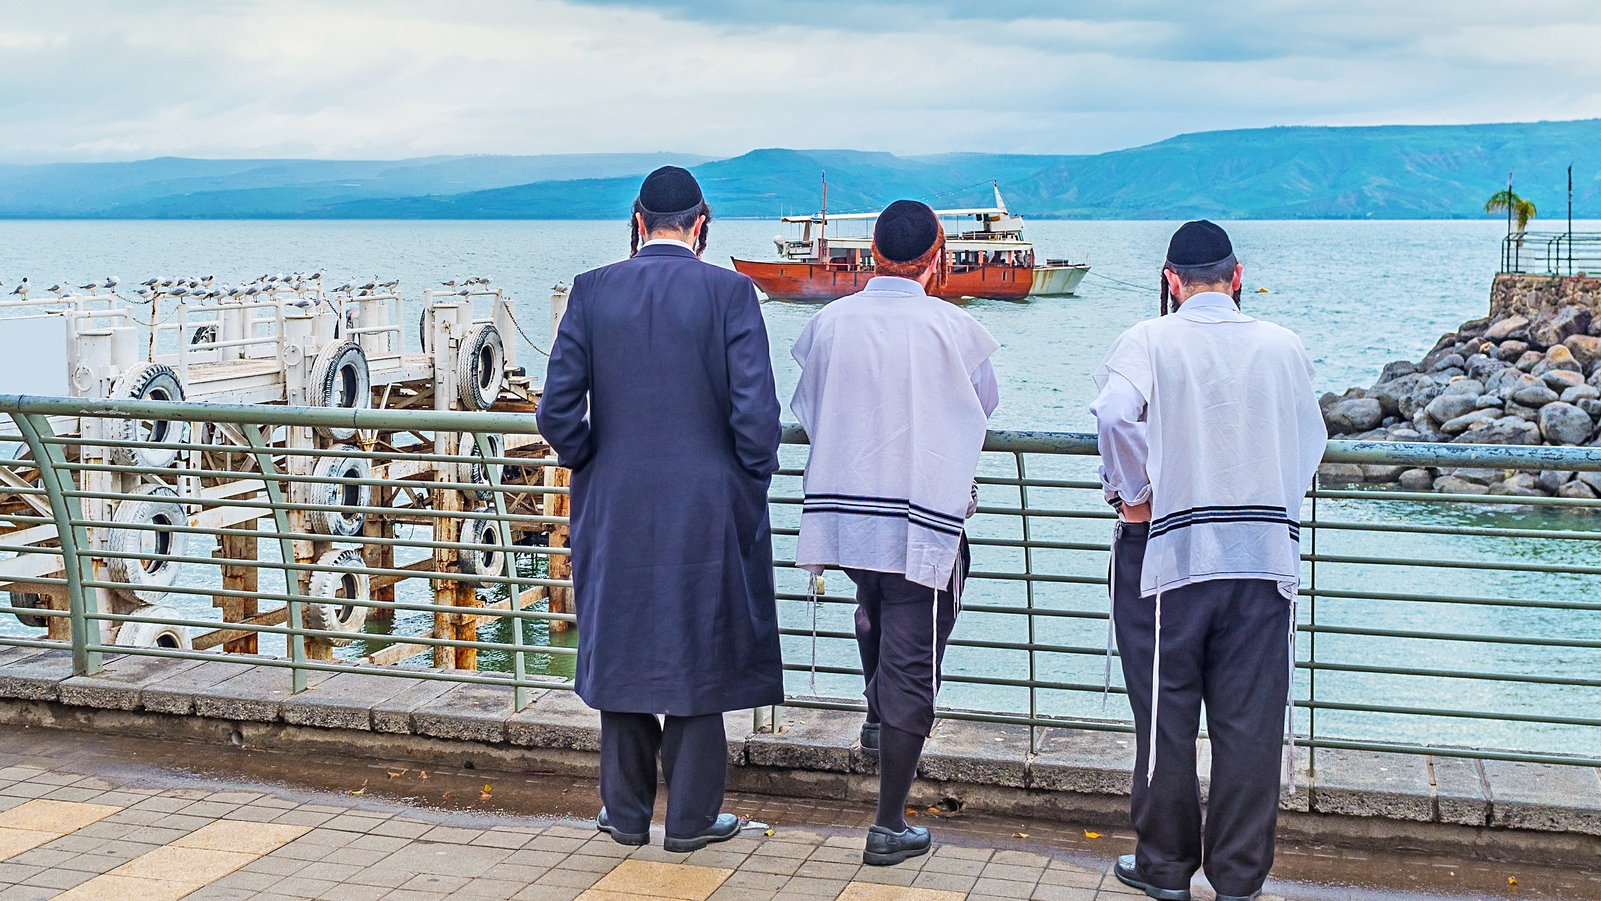 The Blue of the Ocean, the Sky and the Tzitzit